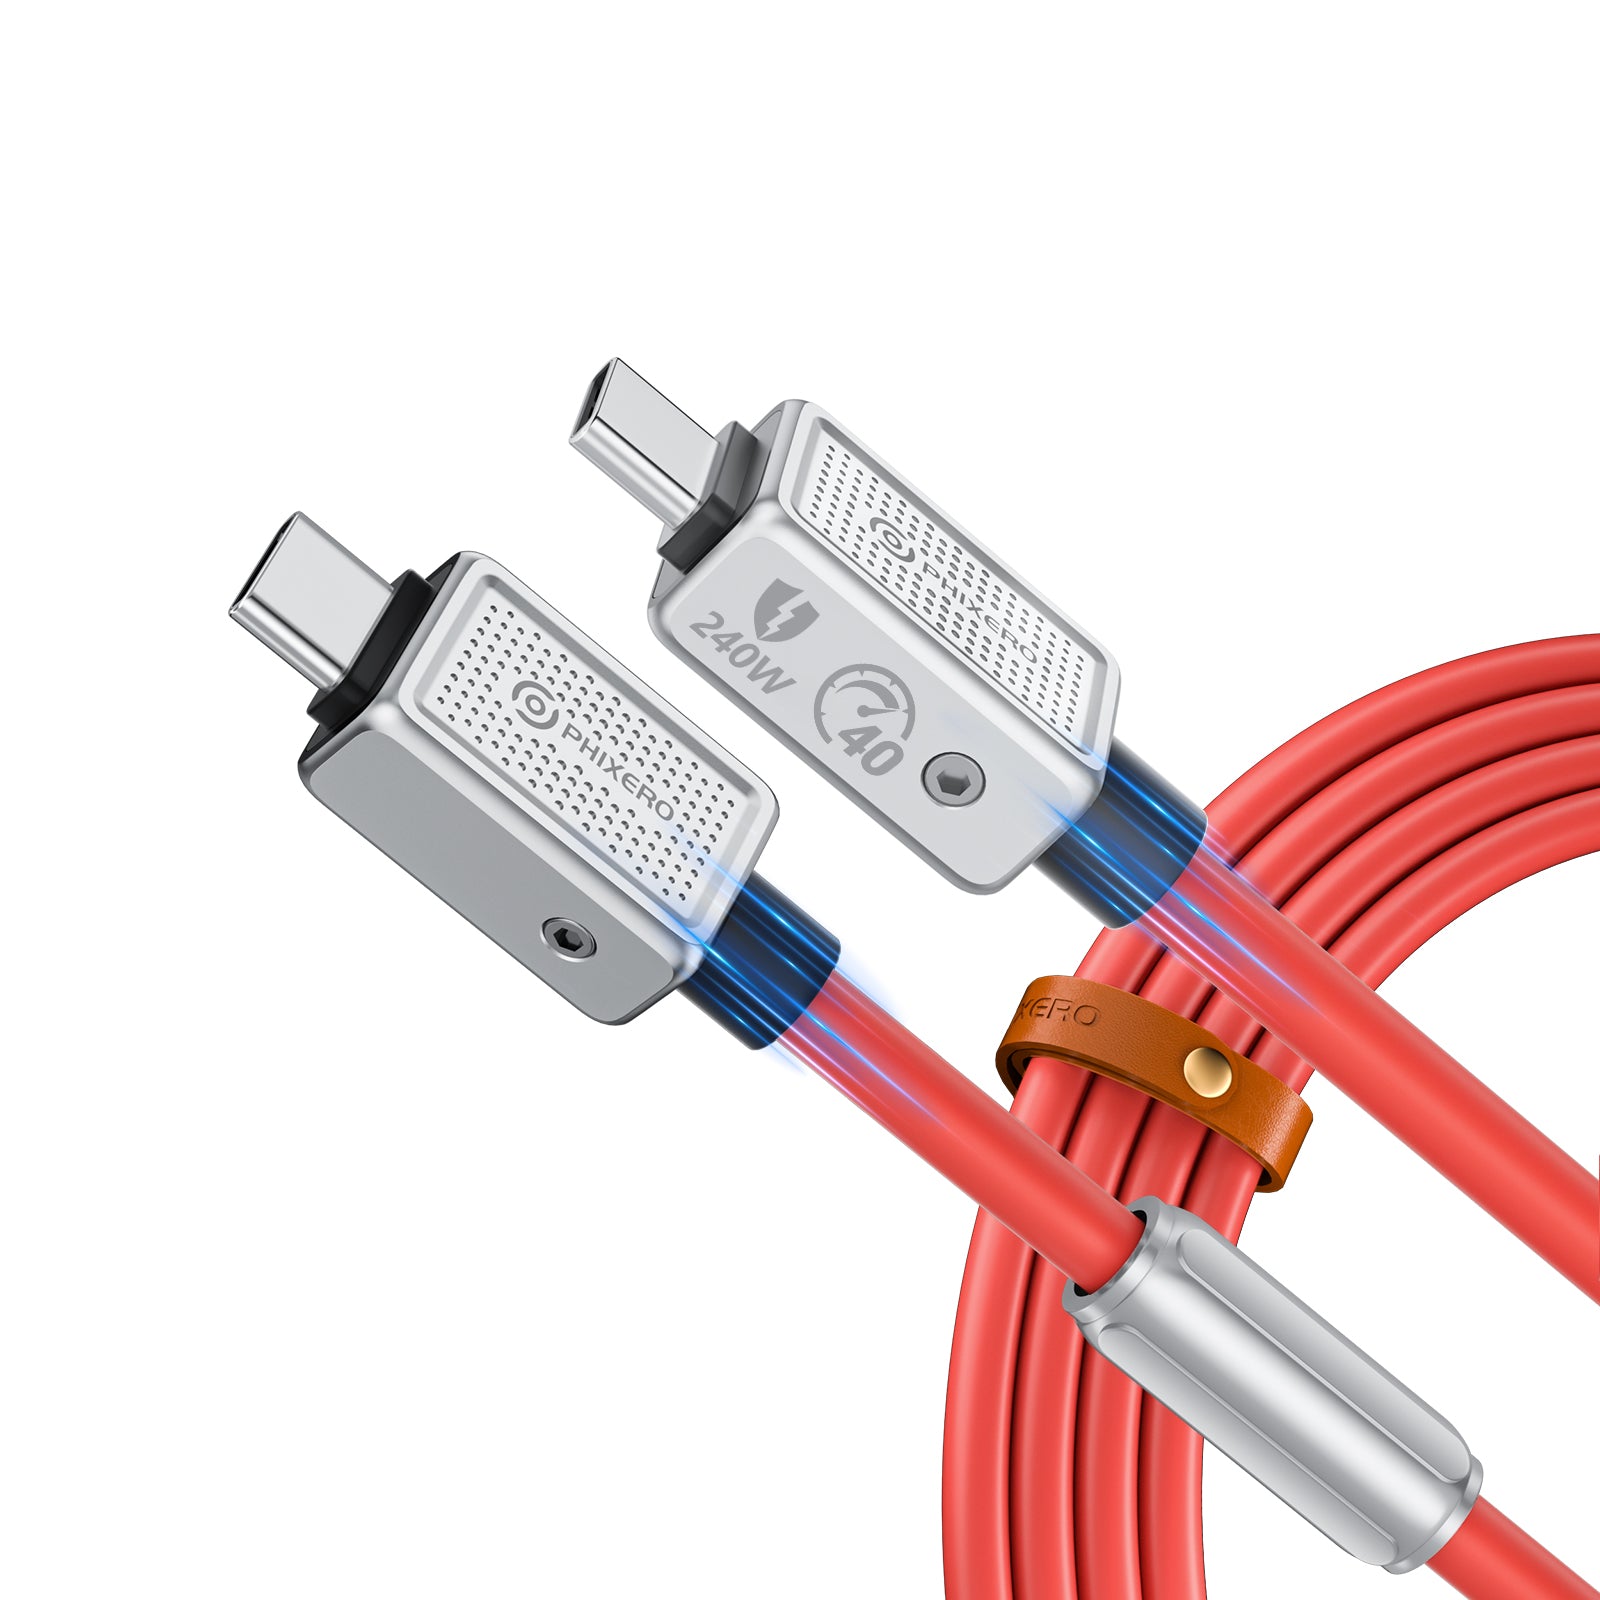 PHIXERO USB 4 Cable 5 ft, Supports 8K/60HZ HD Display, 40 Gbps Data Transfer, 240W C to C Type Fast Charging Cable, for Laptop, Hub, Docking, and More(Red)